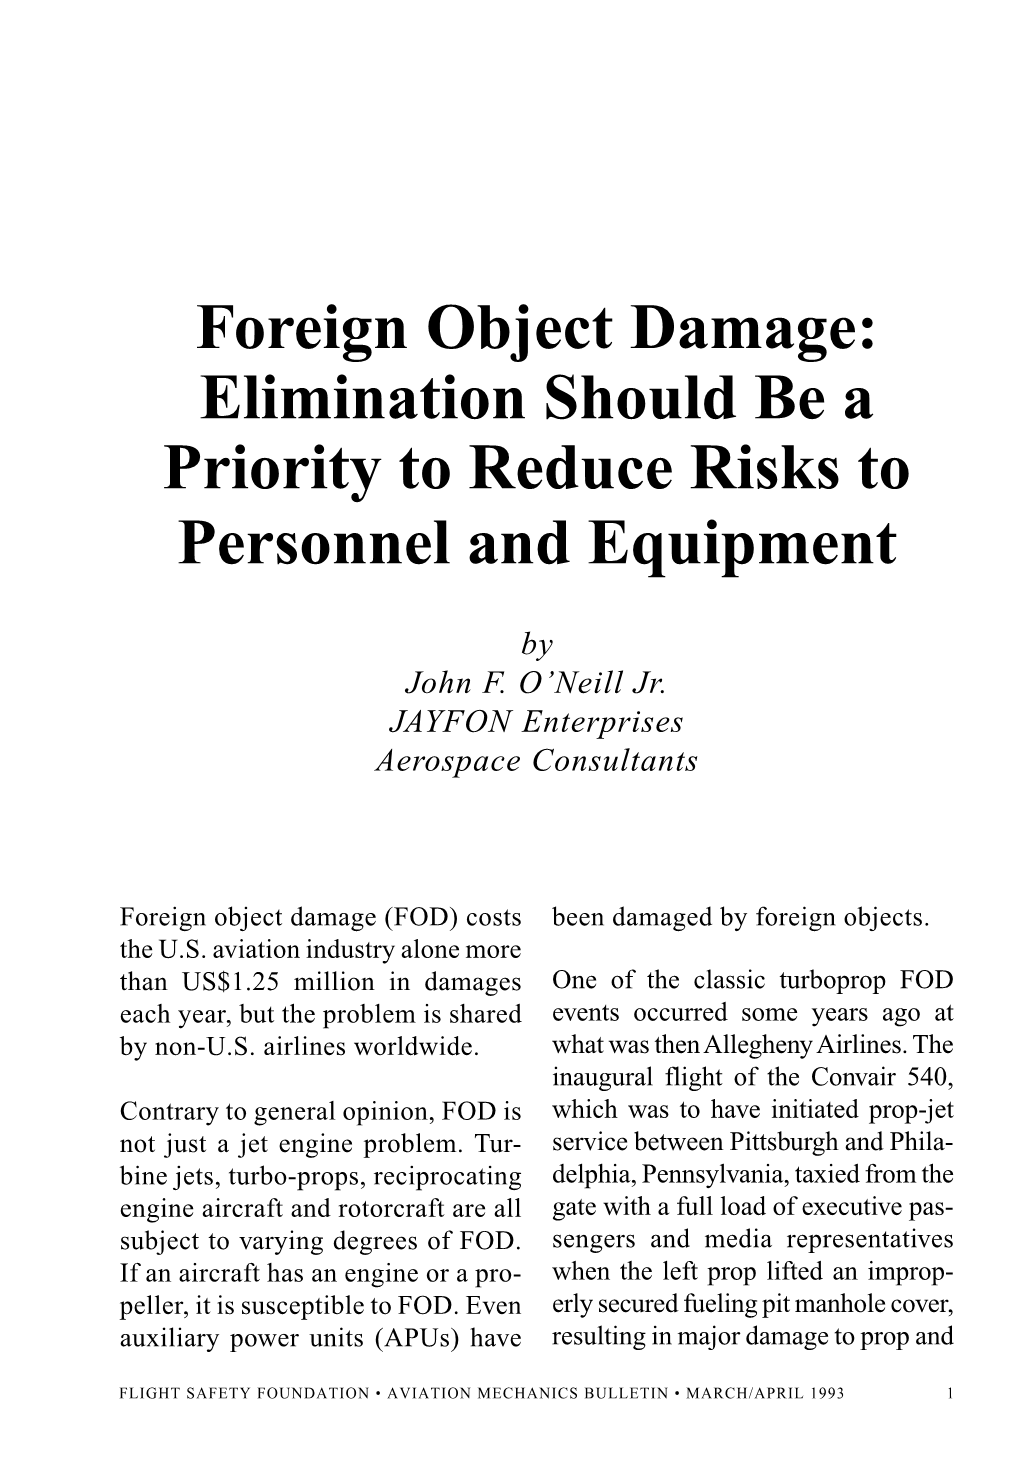 Foreign Object Damage: Elimination Should Be a Priority to Reduce Risks to Personnel and Equipment